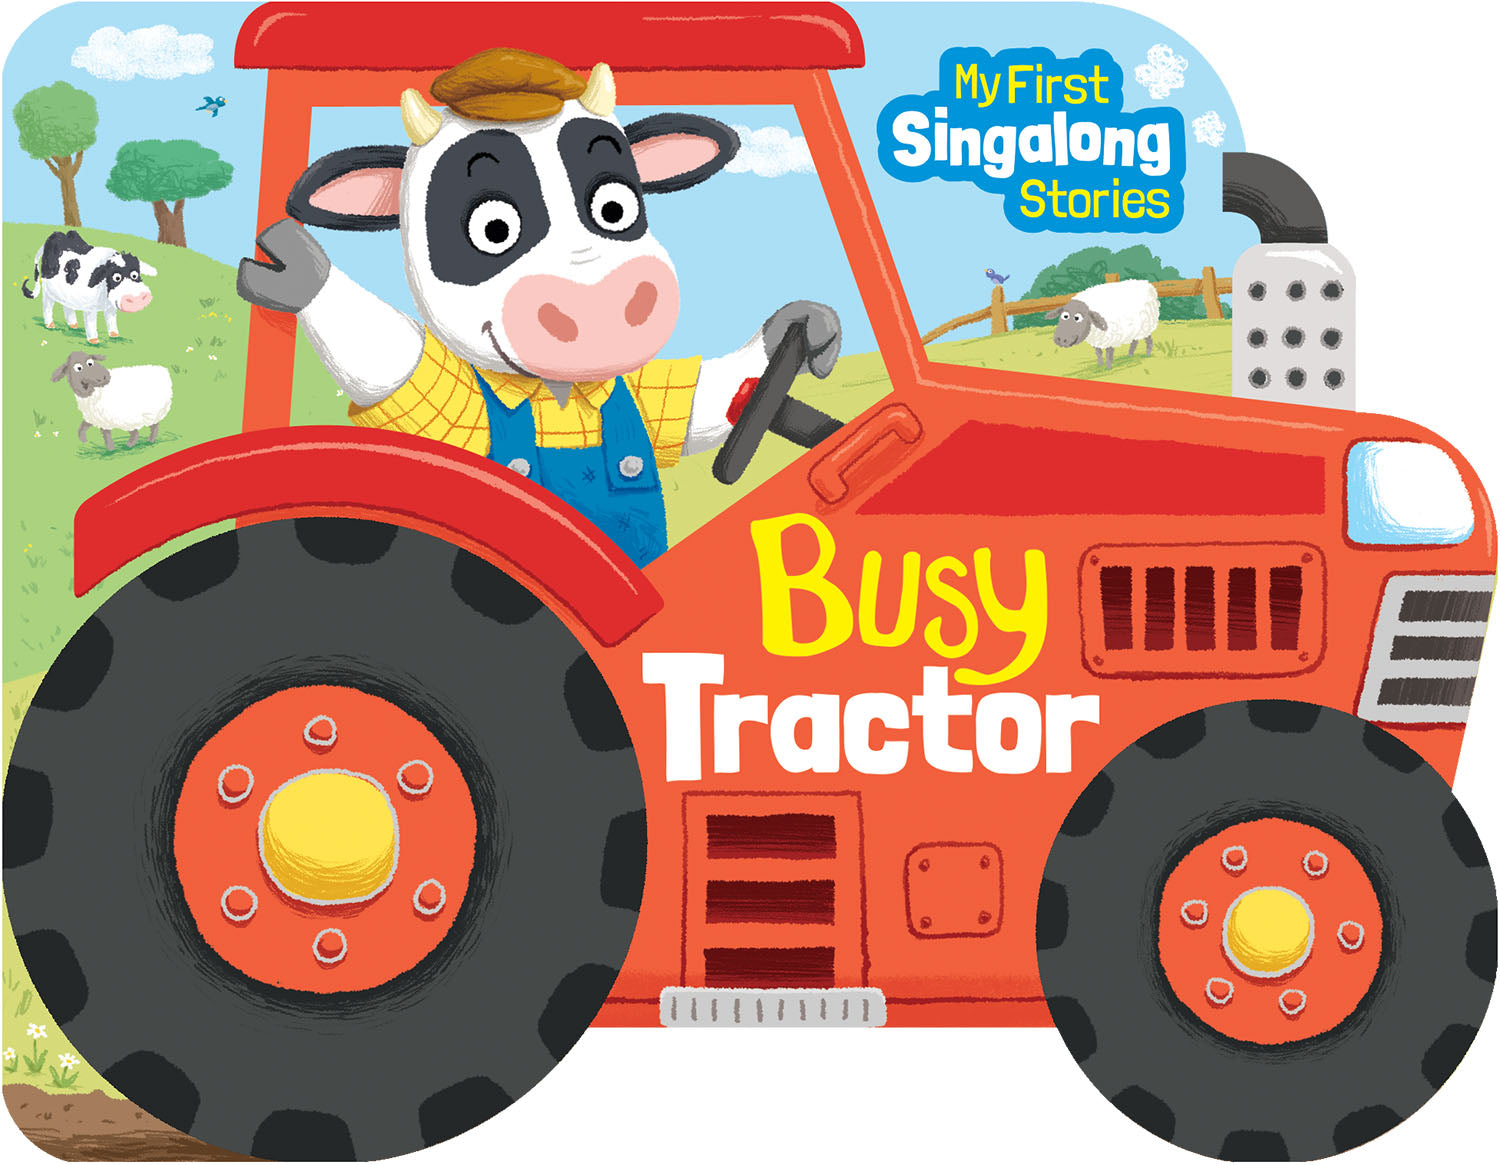 My First Singalong Stories: Busy Tractor